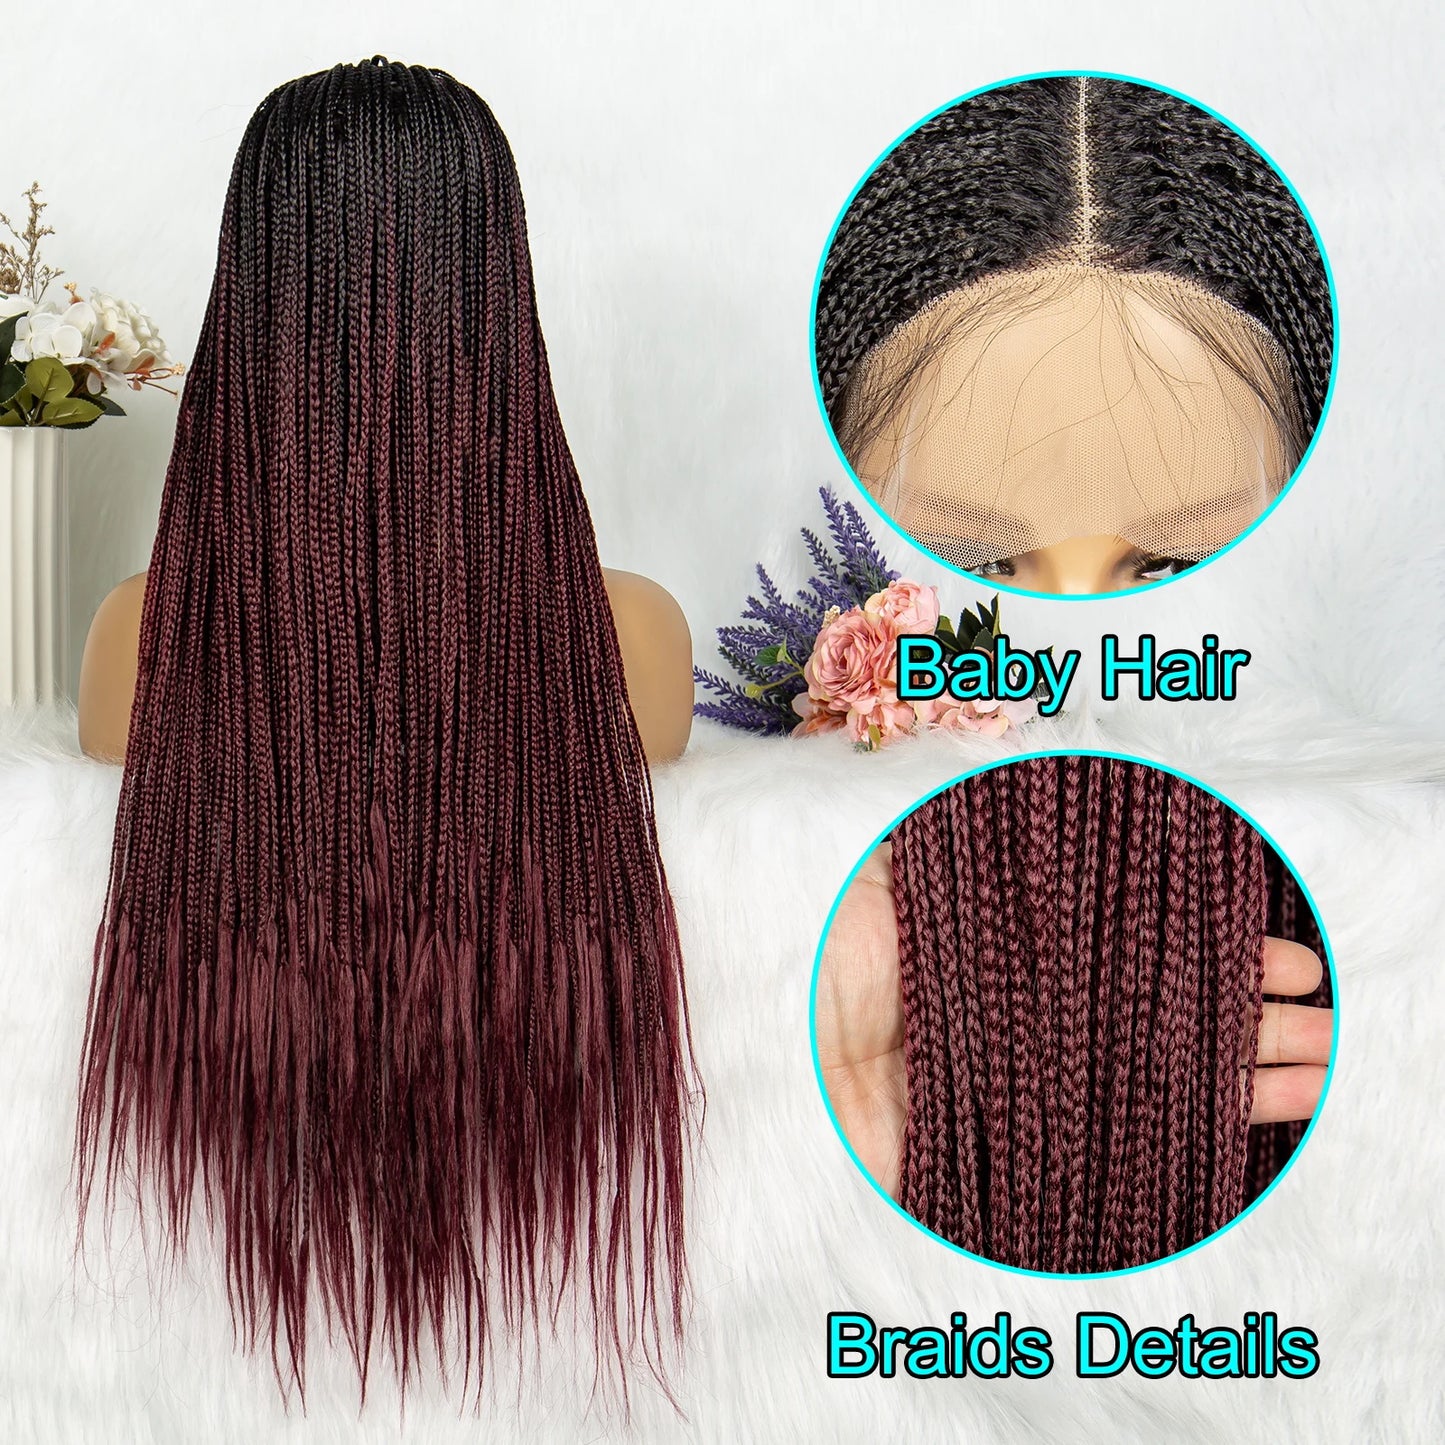 Synthetic Lace Wigs, Cornrow Braids Wig 13x4x1 T Part Lace Braided Wig